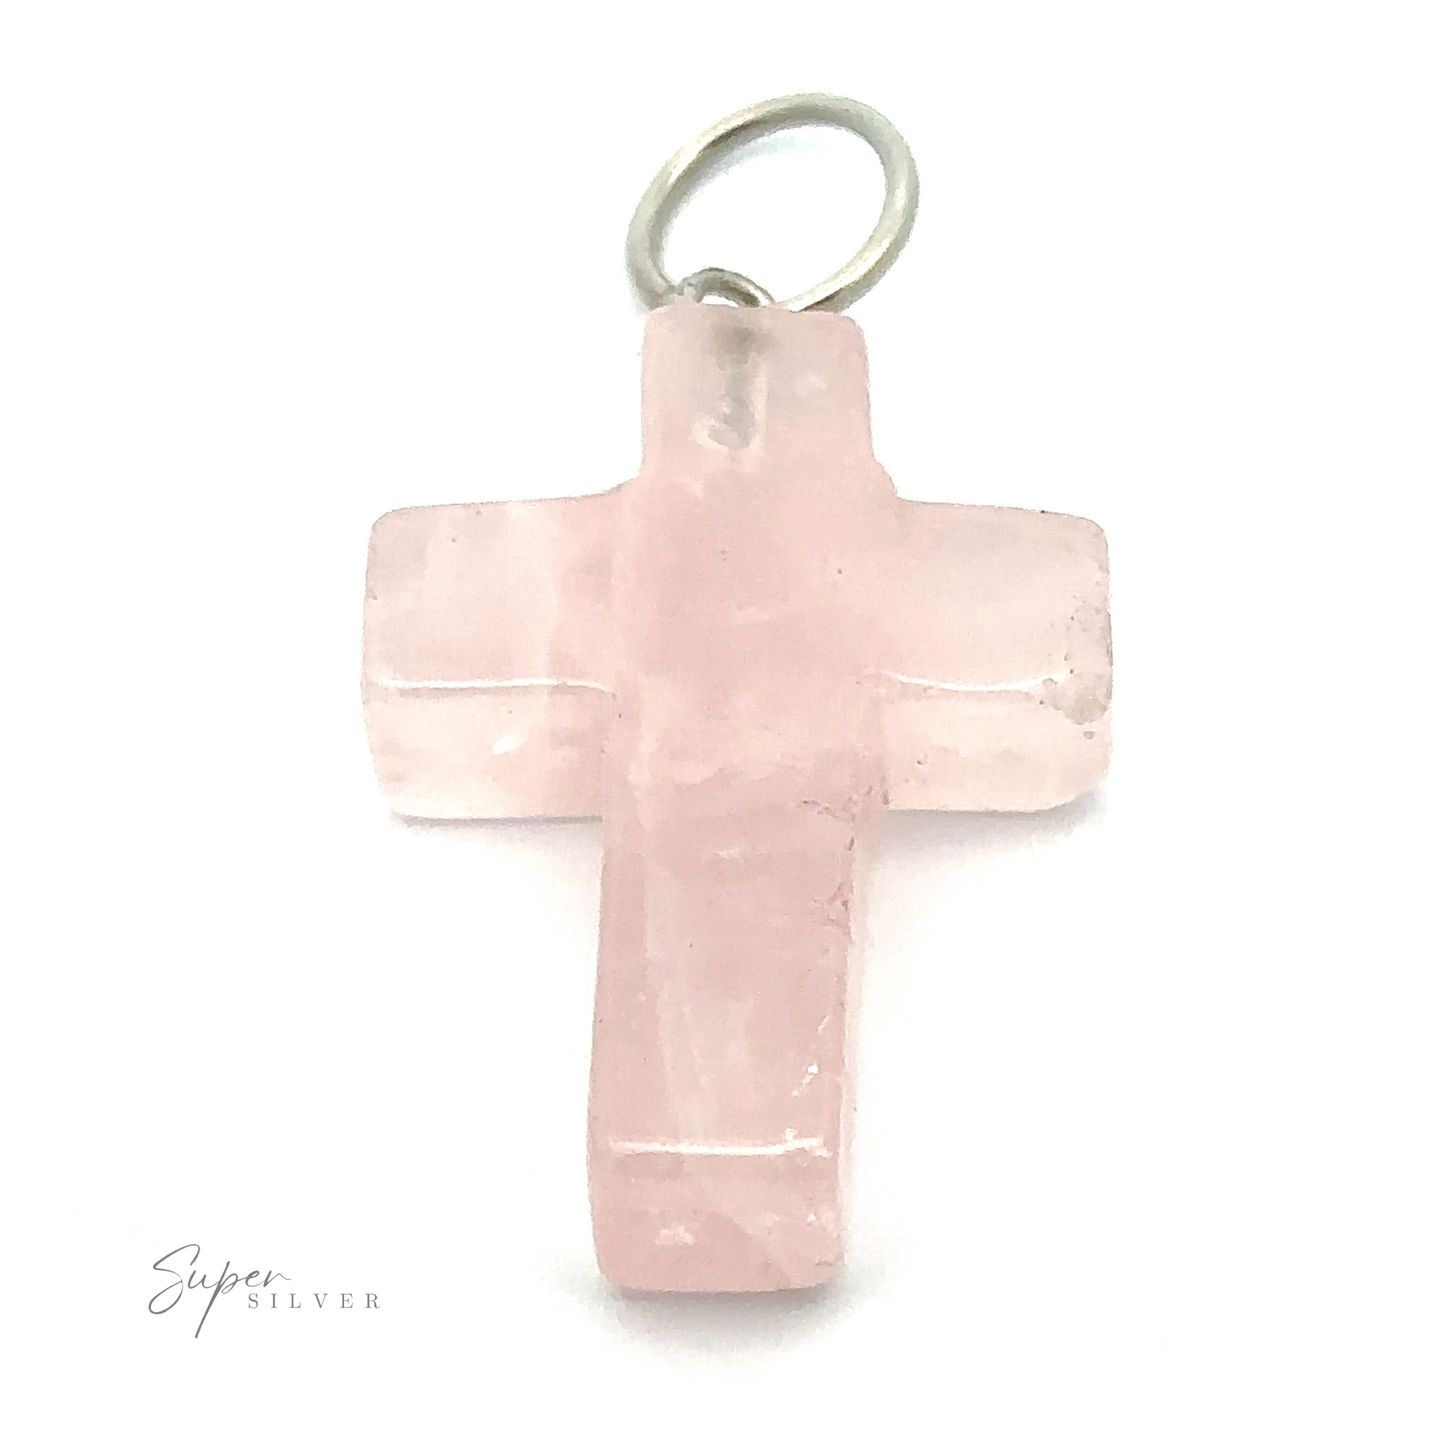 A Stone Cross Pendant with a small metal loop at the top for attaching to a necklace. The pendant has a slightly translucent and polished surface.